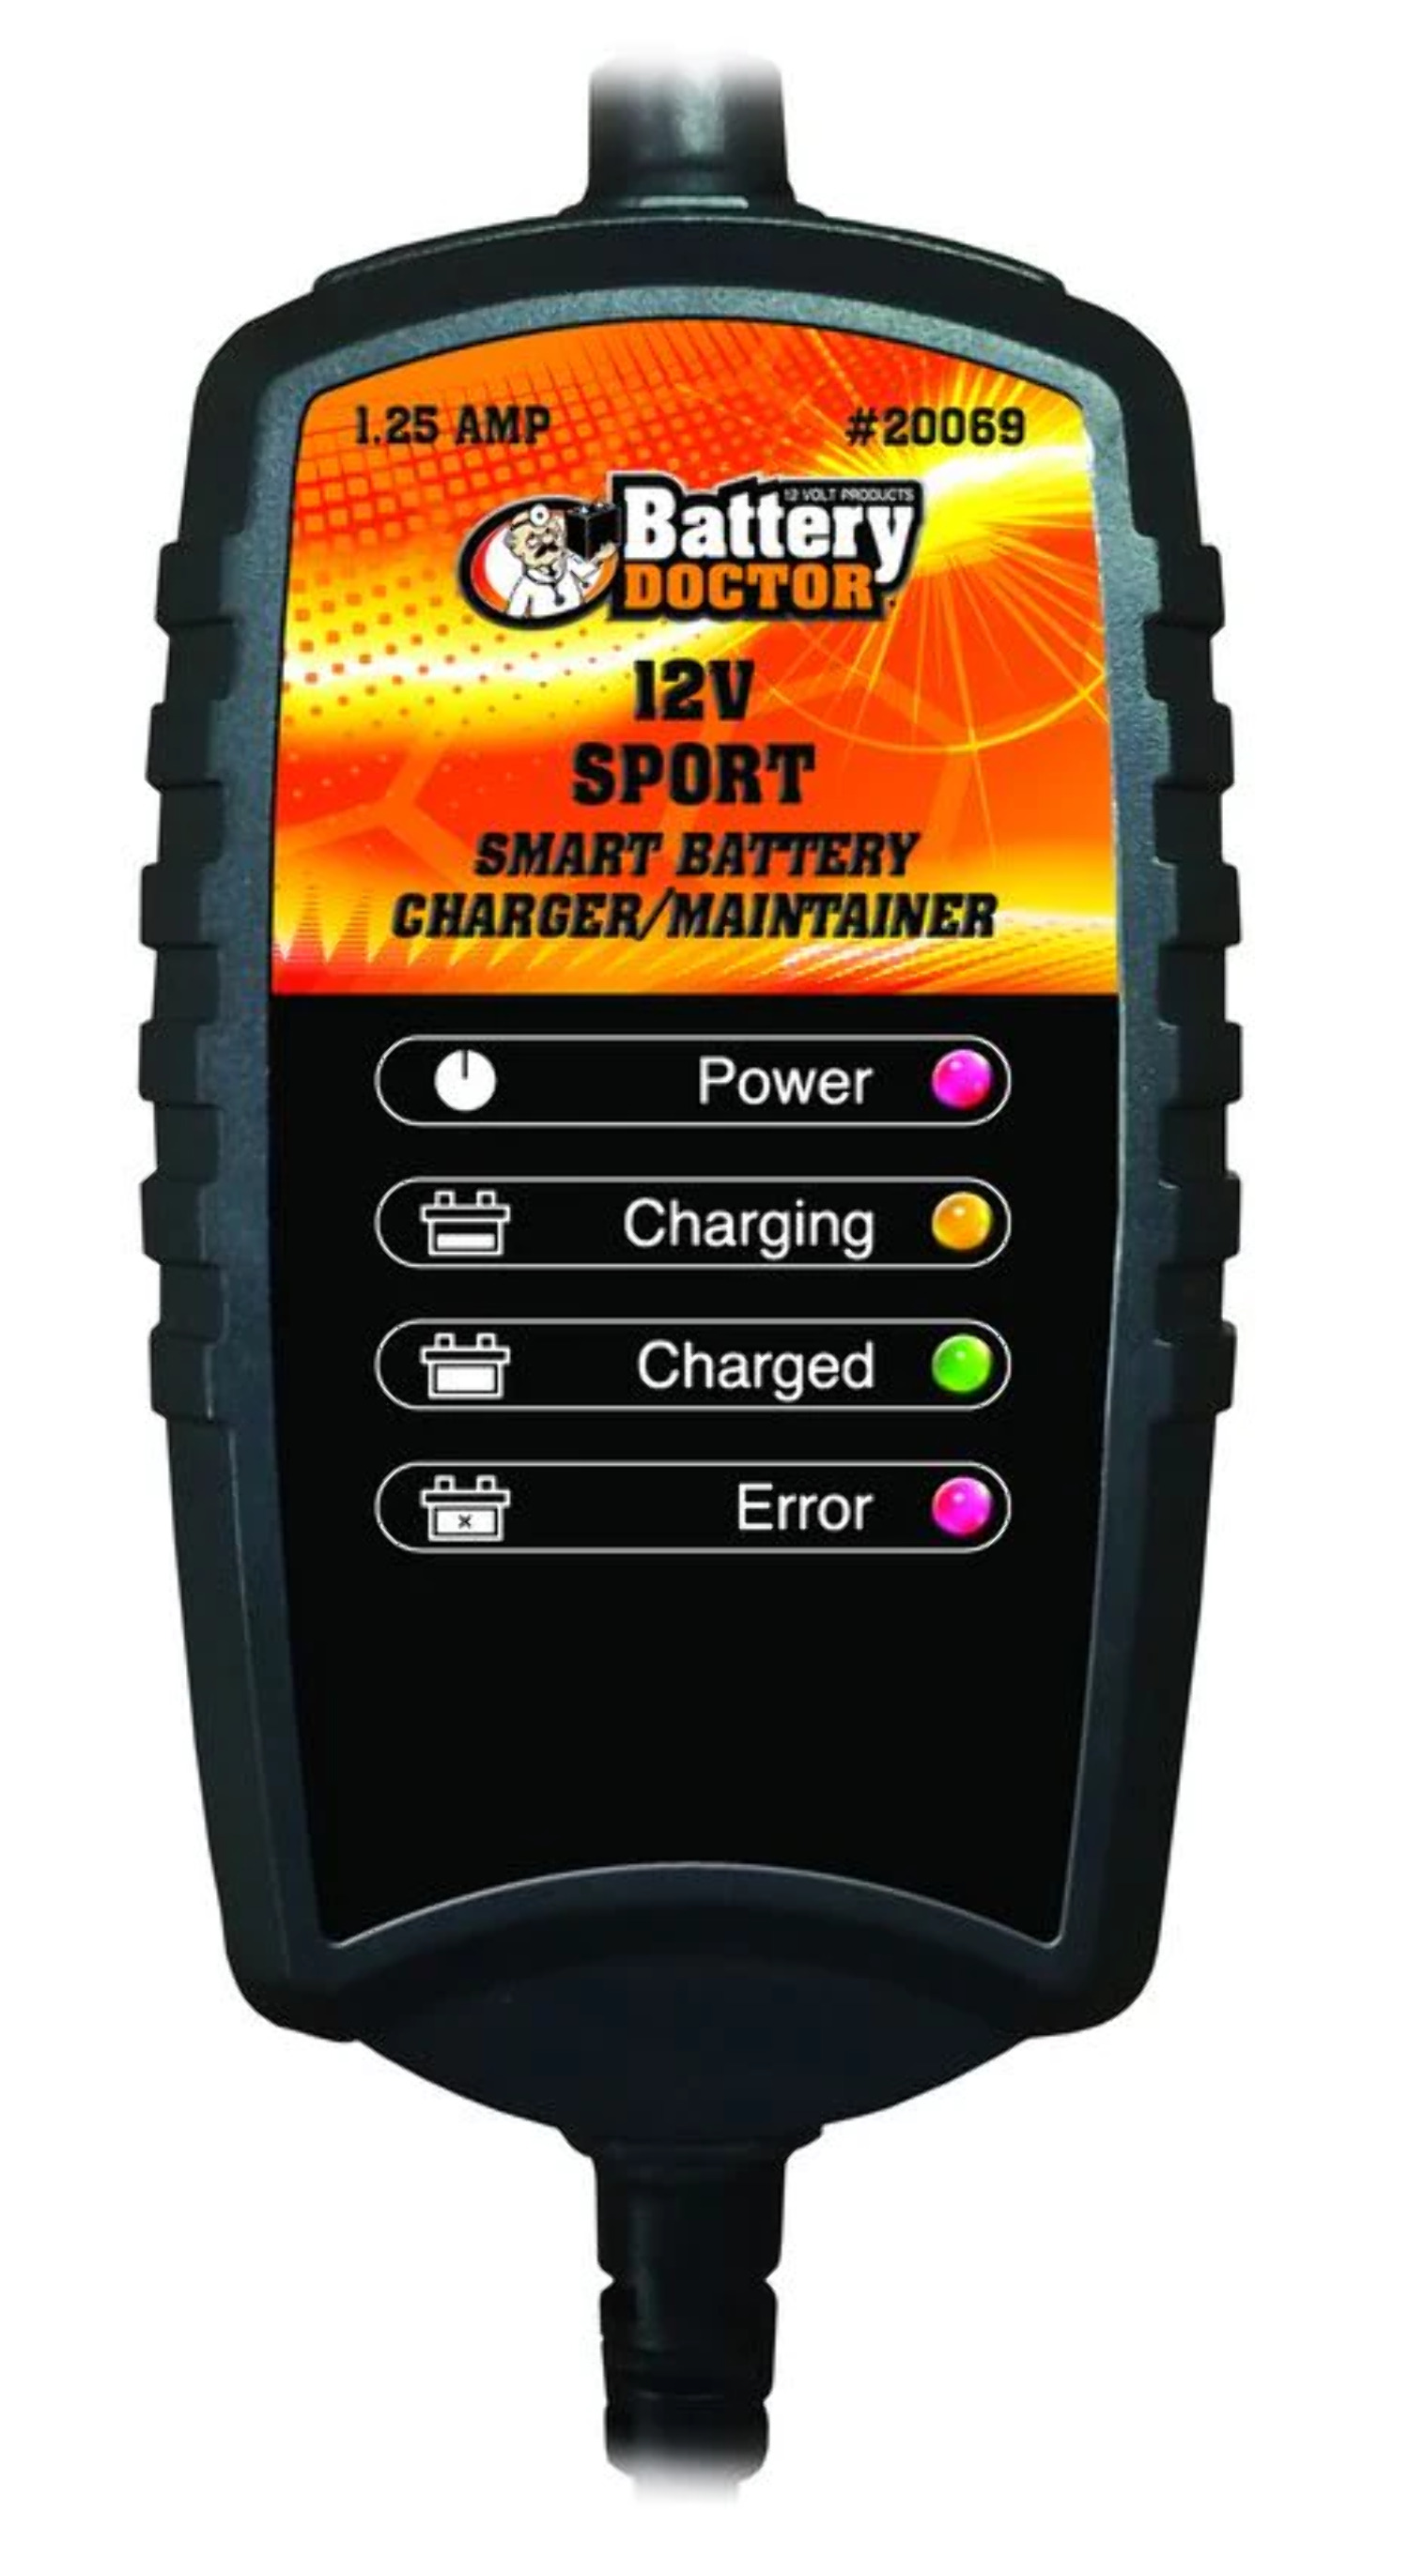 Battery Tender Plus 12V Battery Charger and Maintainer: 1.25 AMP Powersport Battery Charger and Maintainer for Motorcycles, ATVs, UTVs - Smart 12 Volt Automatic Float Charger - 021-0128 - image 3 of 9